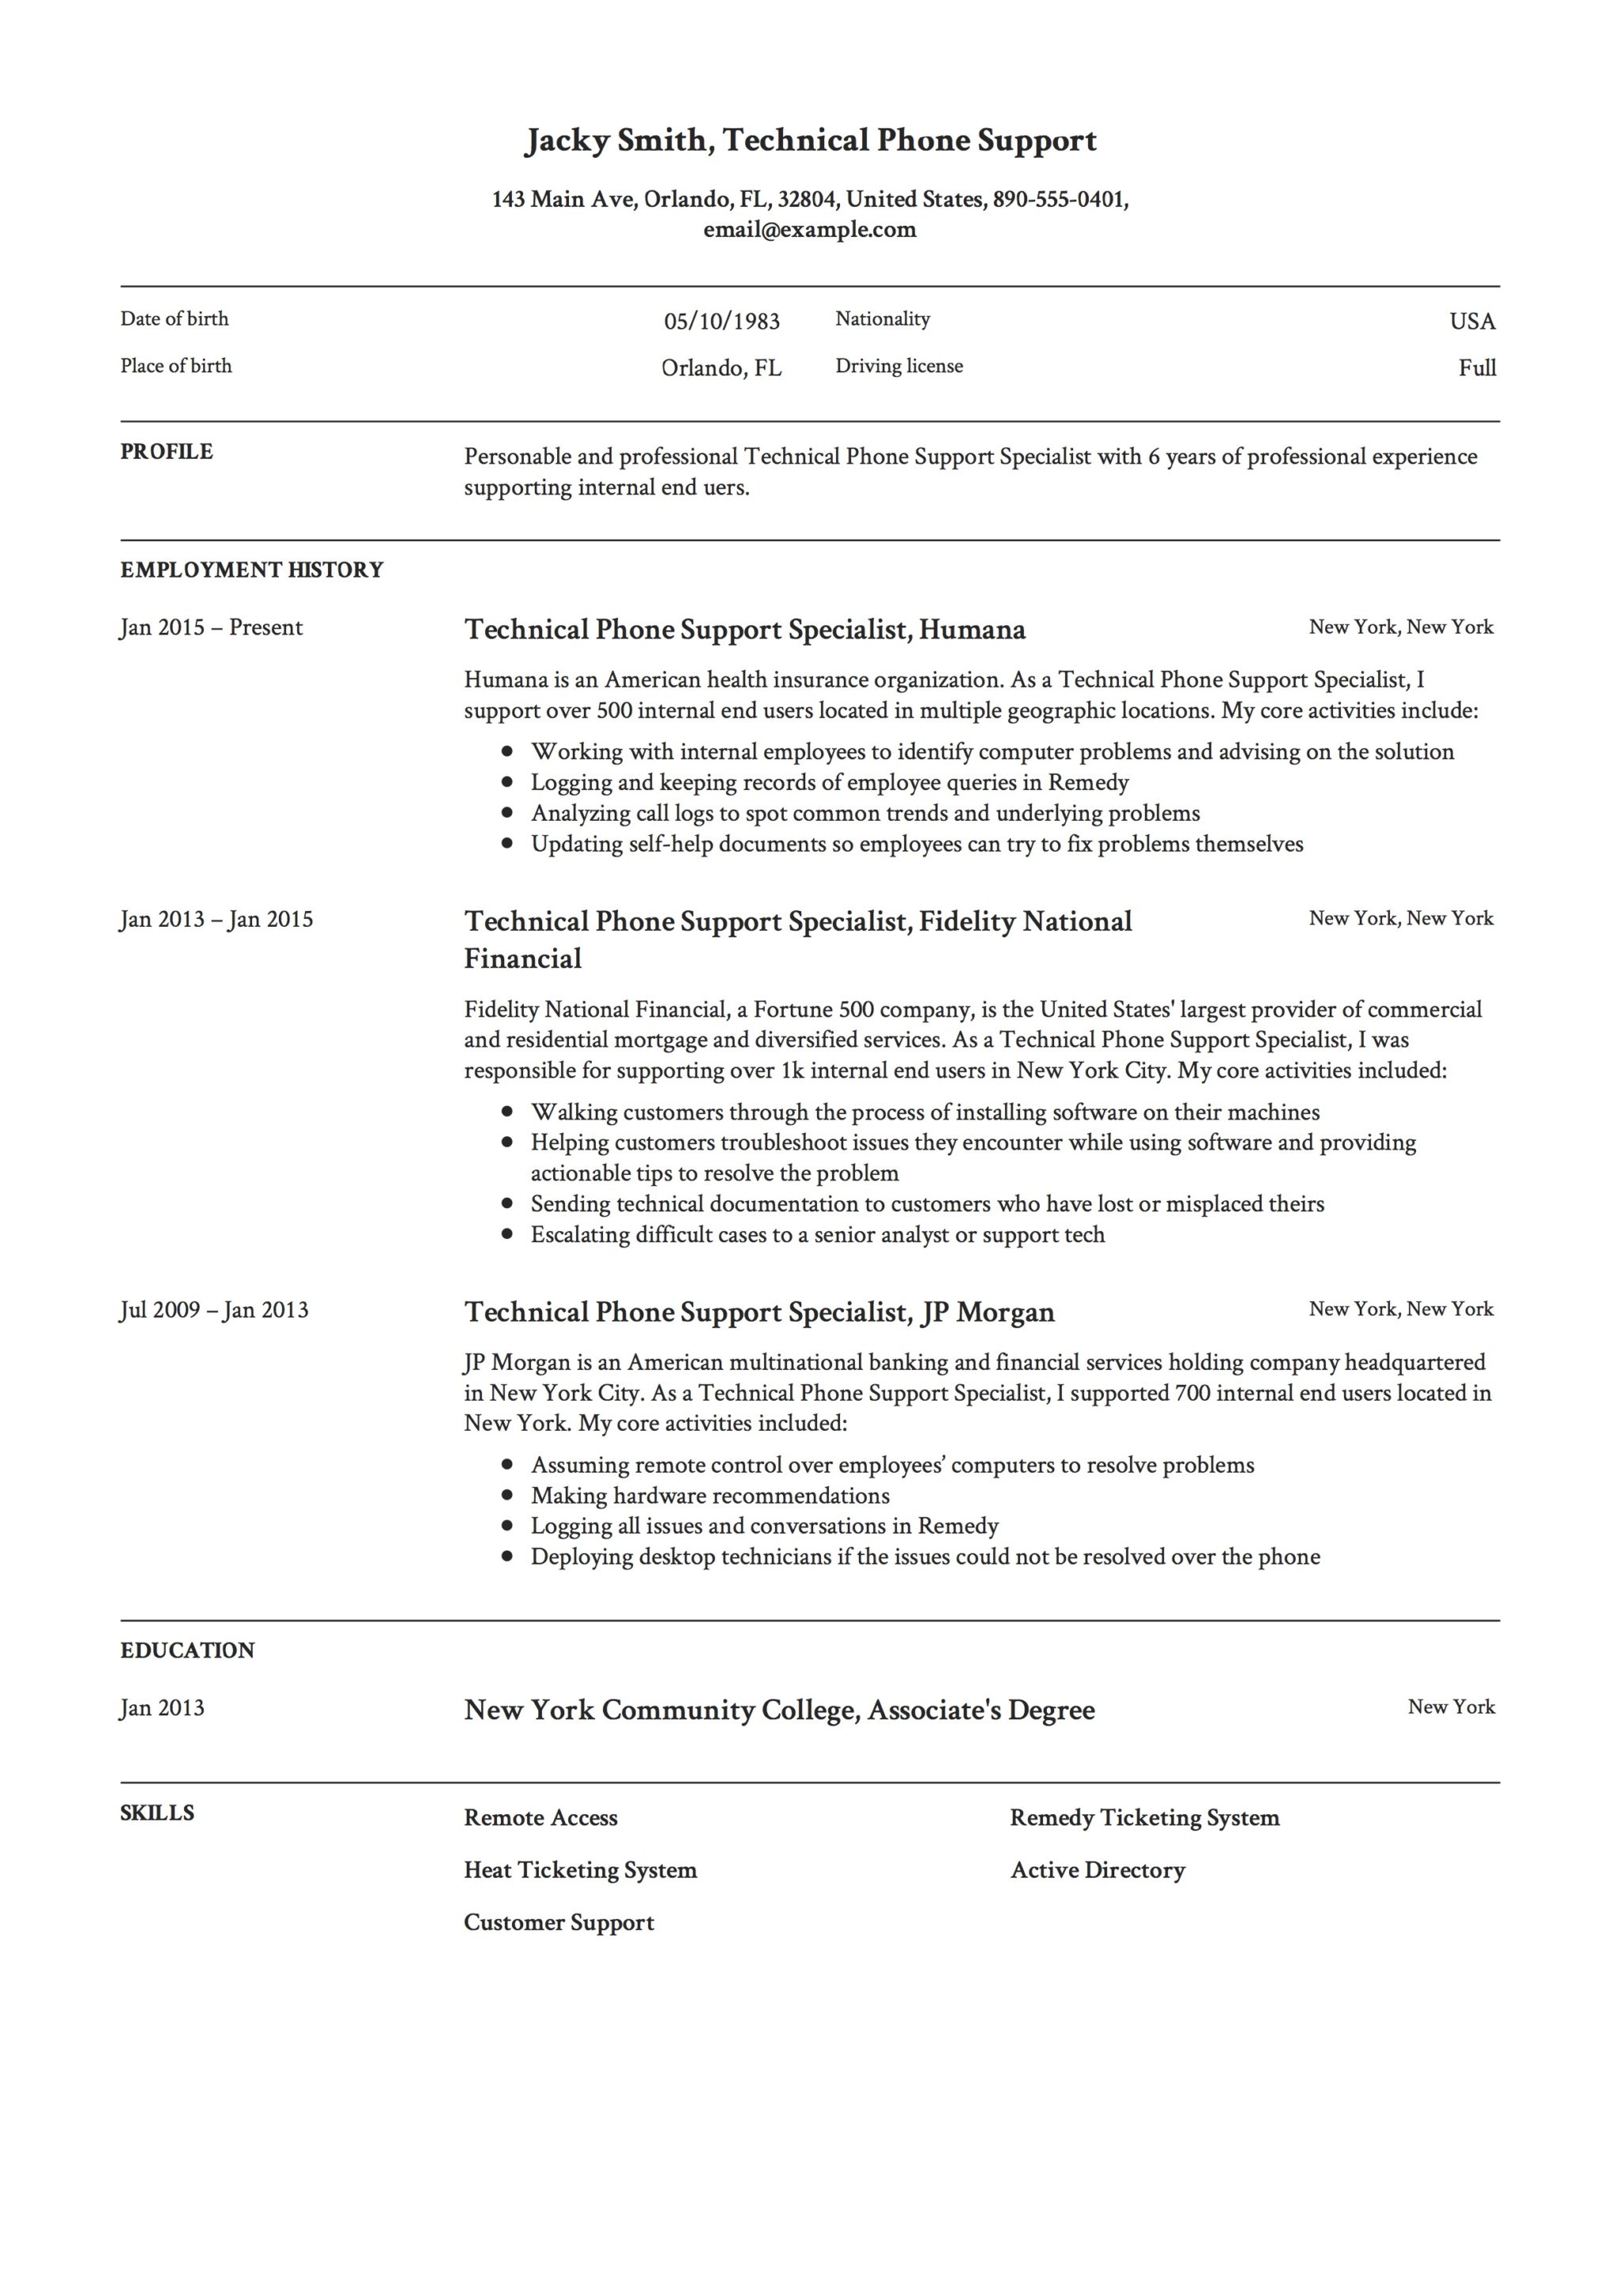 Classic and Professional Technical Phone Support Resume Sample